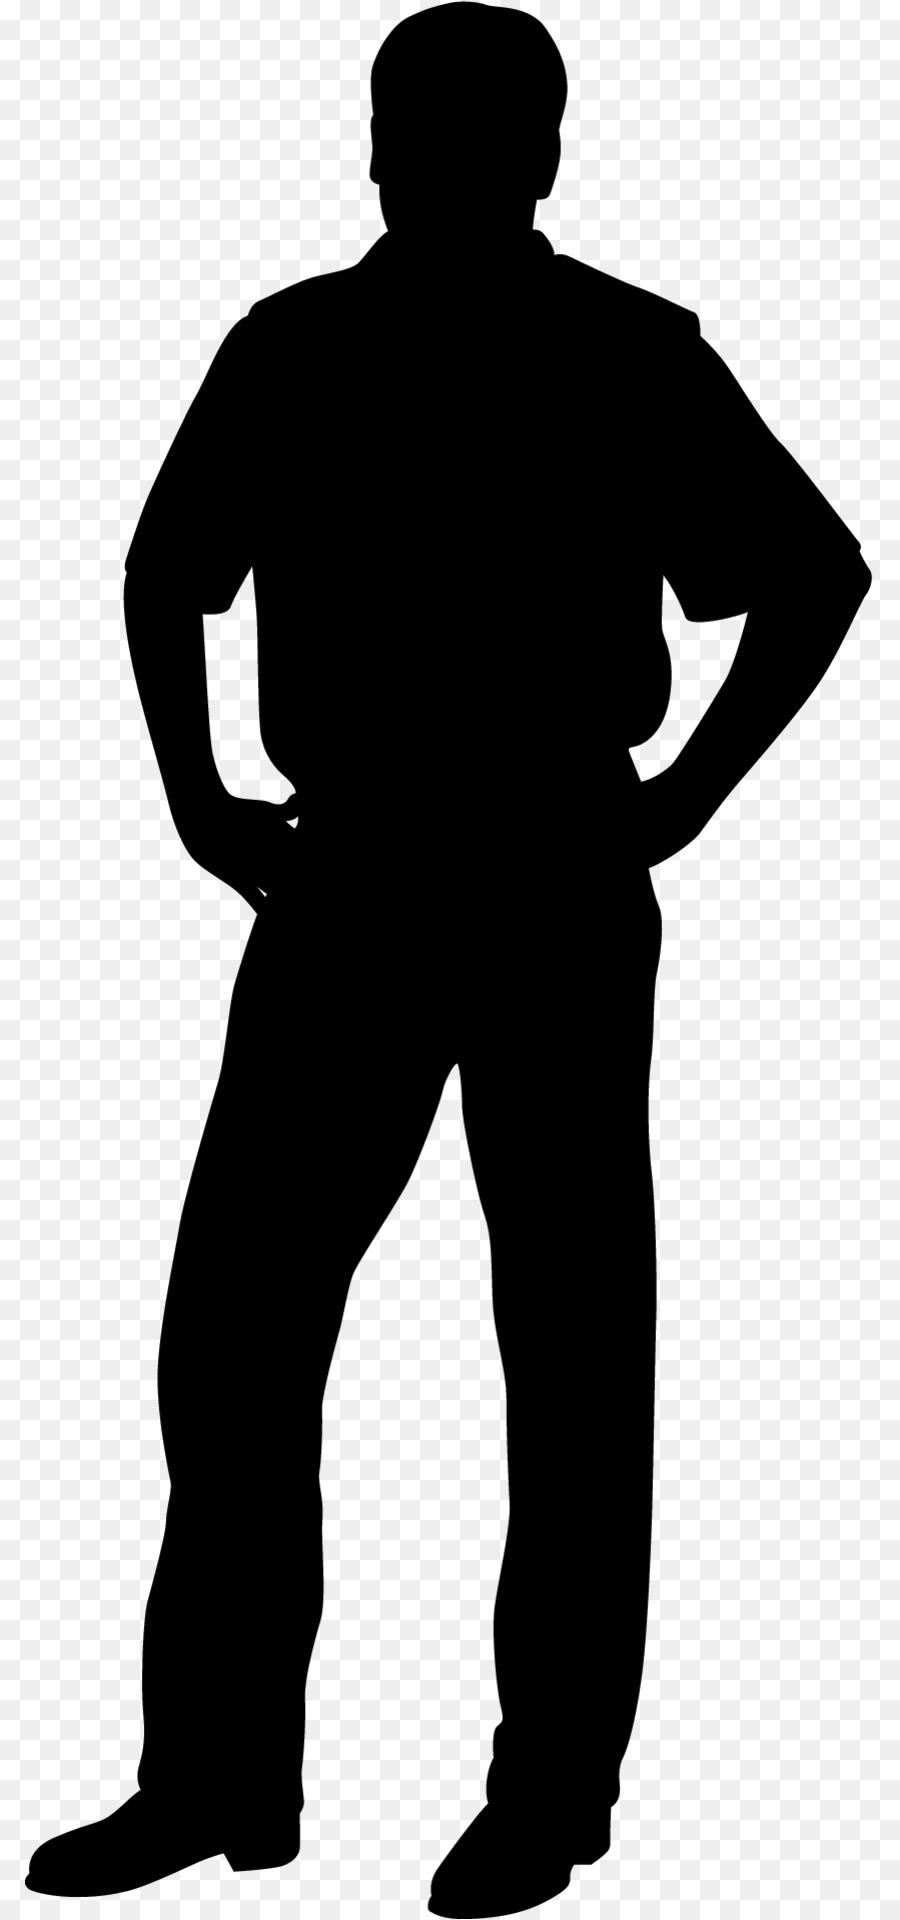 Silhouette Stock photography - man silhouette png download - 850*1919 - Free Transparent Silhouette png Download.